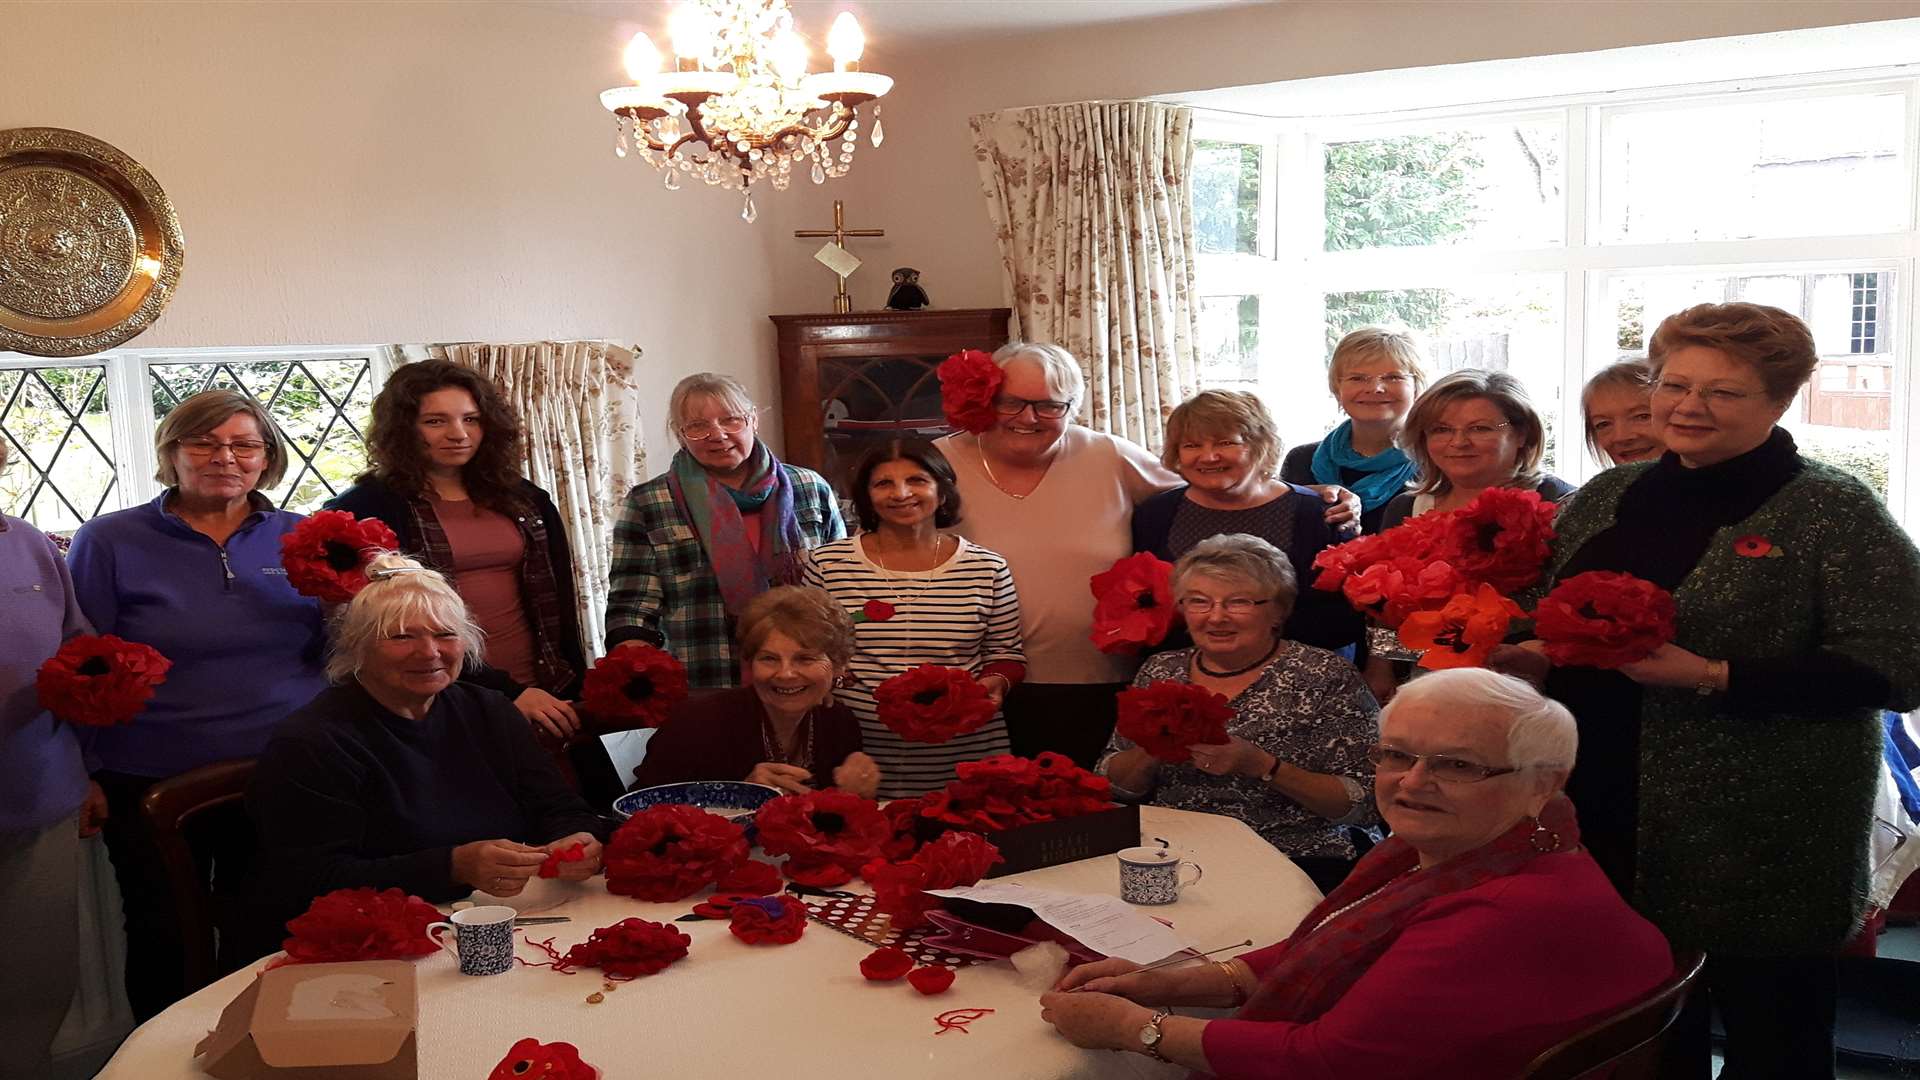 The DVD will show Masheeda Downing and her friends making and sorting through the poppies